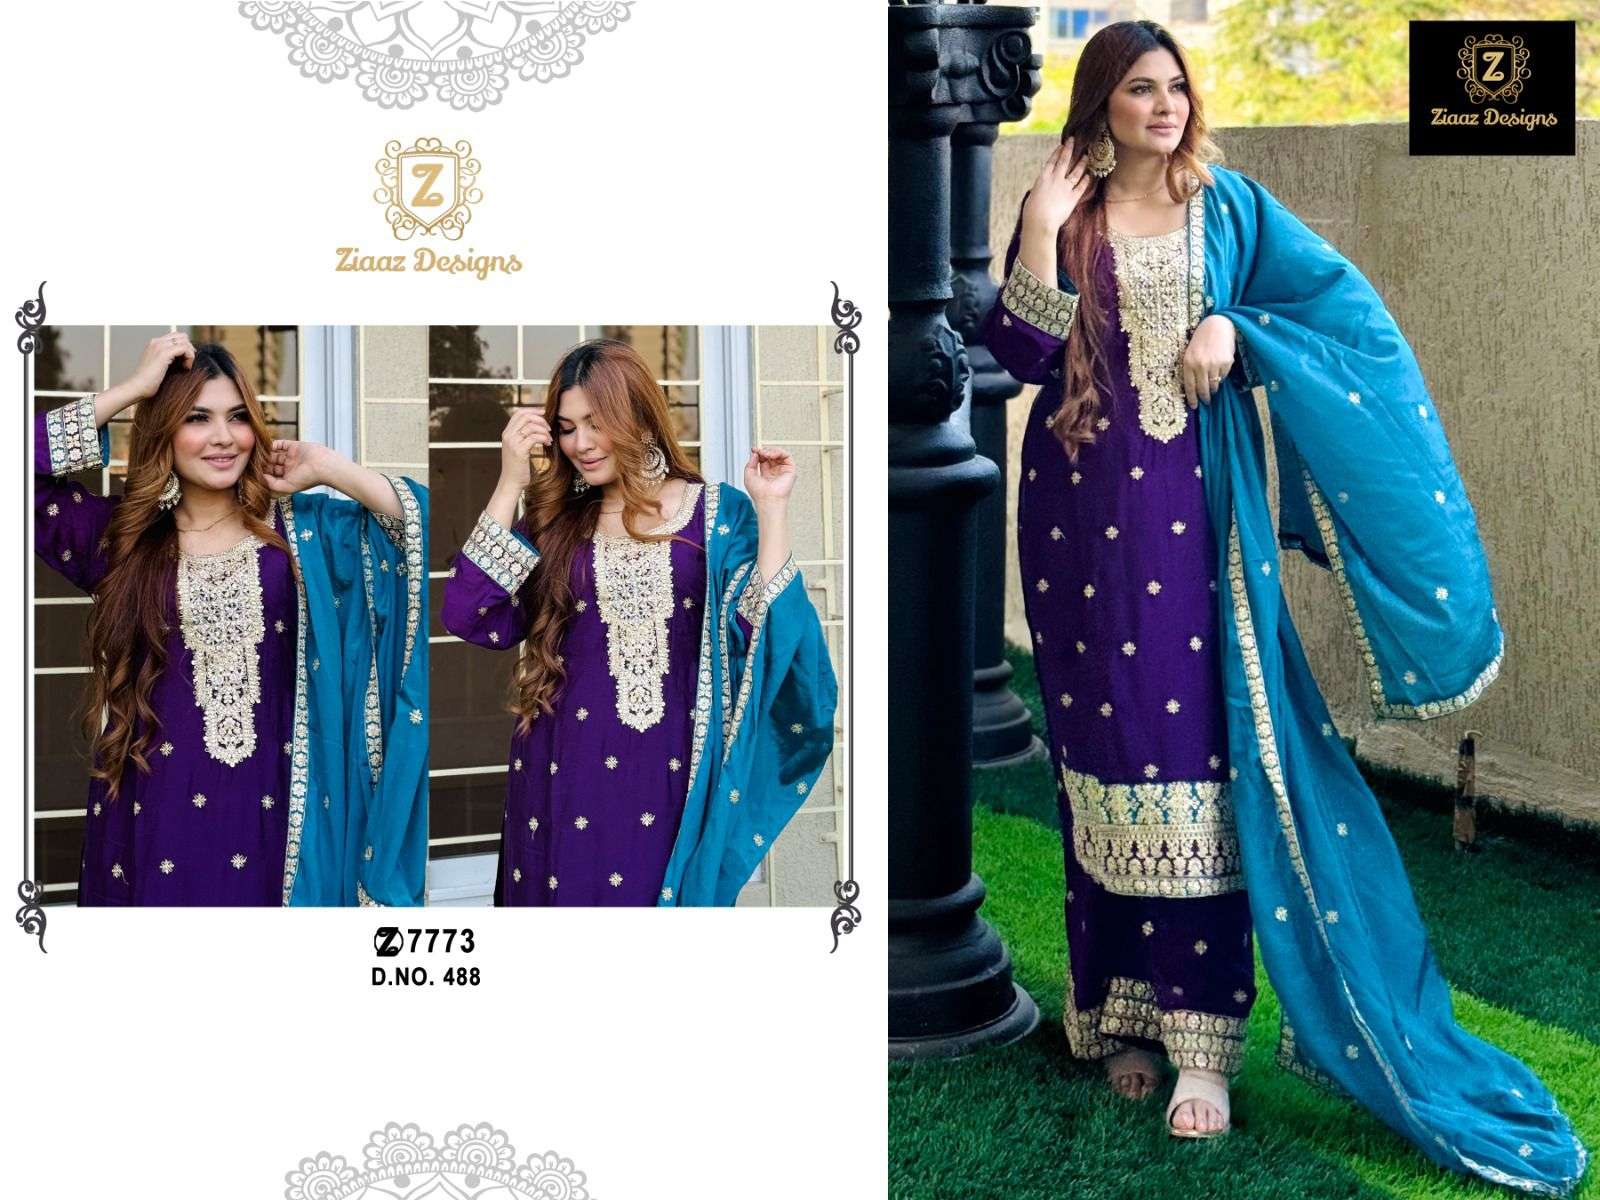 Ziaaz Designs 488 Chinon Semi stitched very heavy embroidery suit